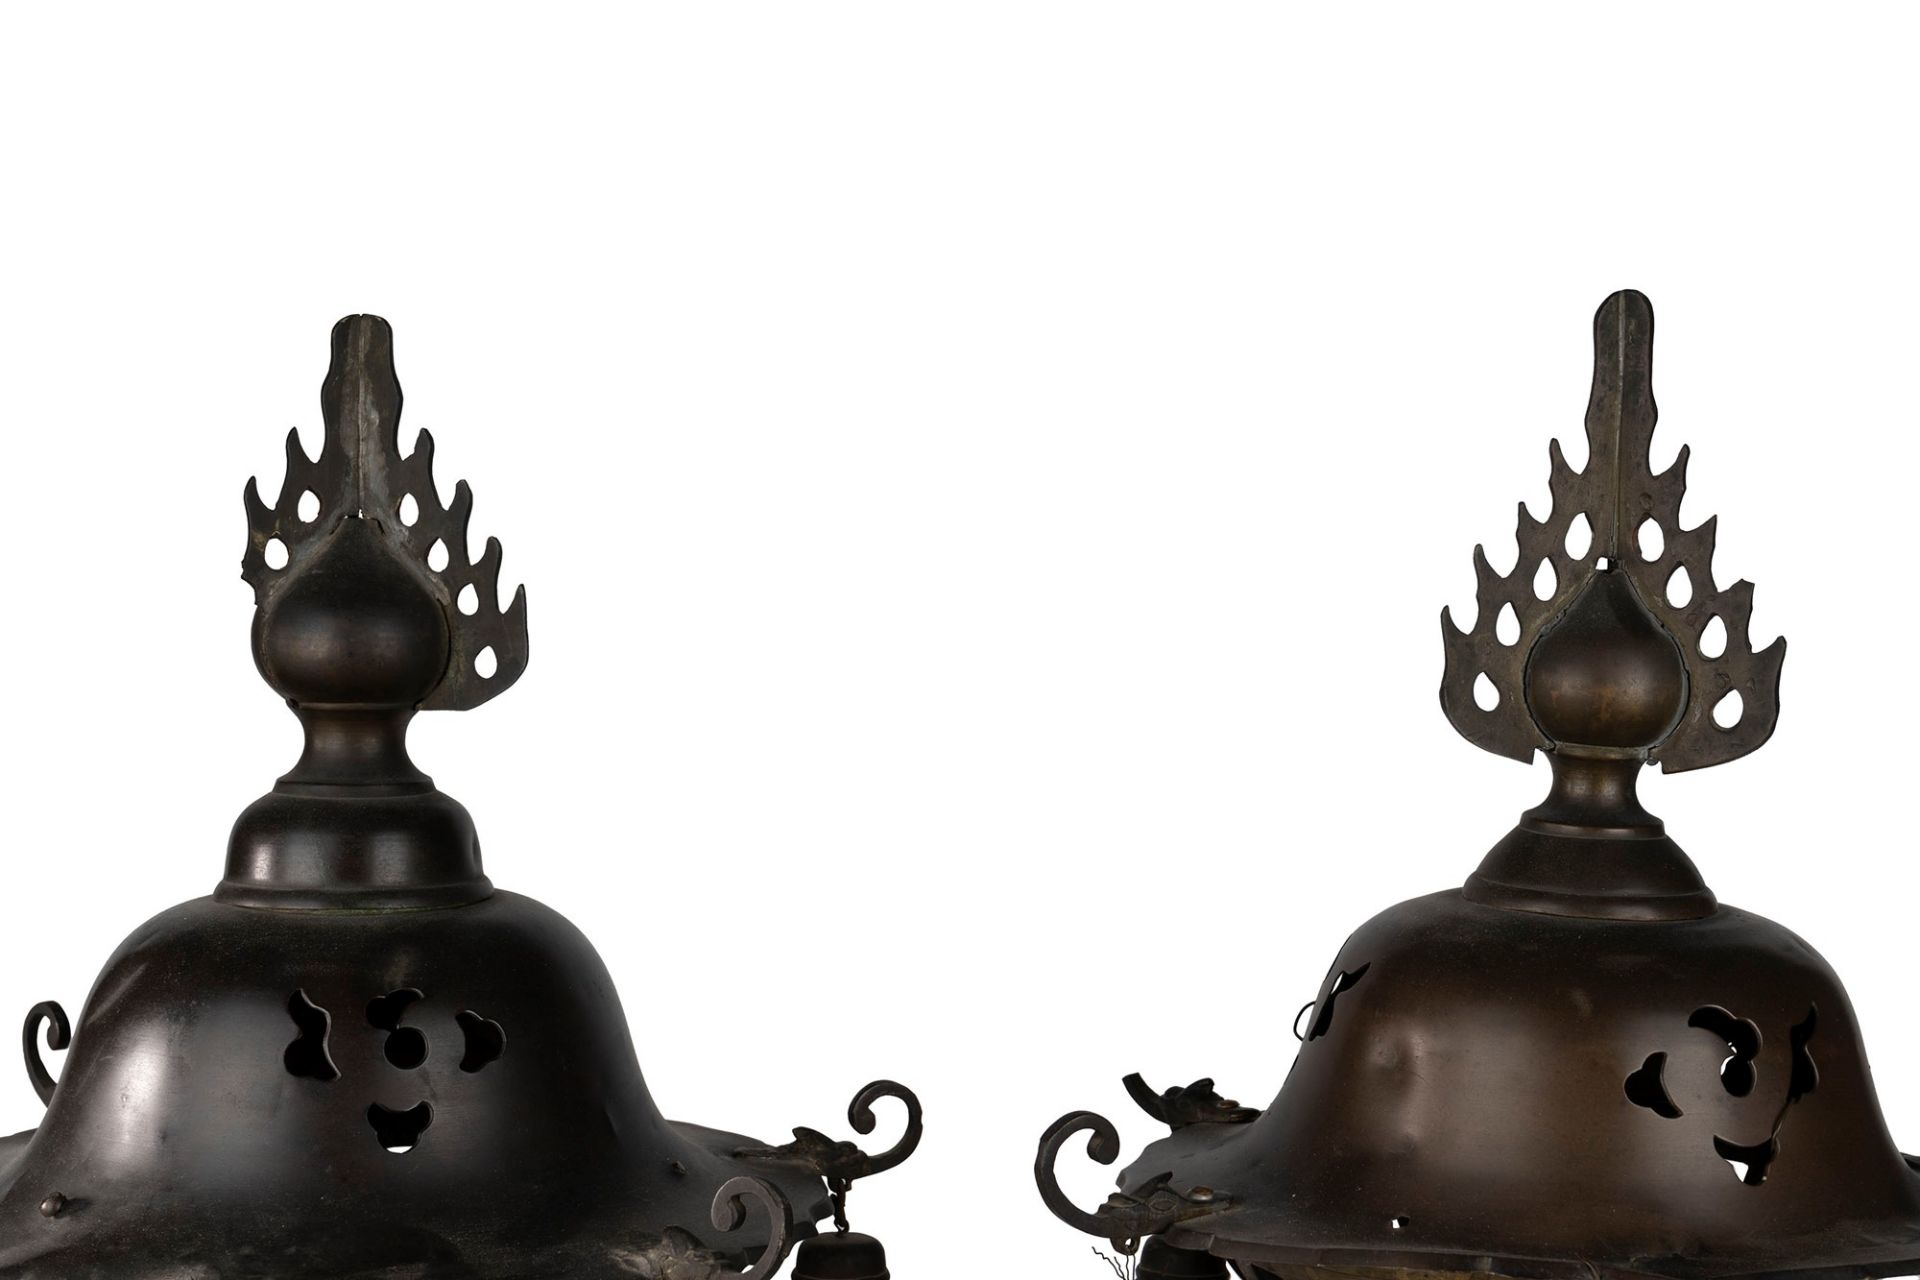 Two metal lamps, China, early 20th century - Image 3 of 3